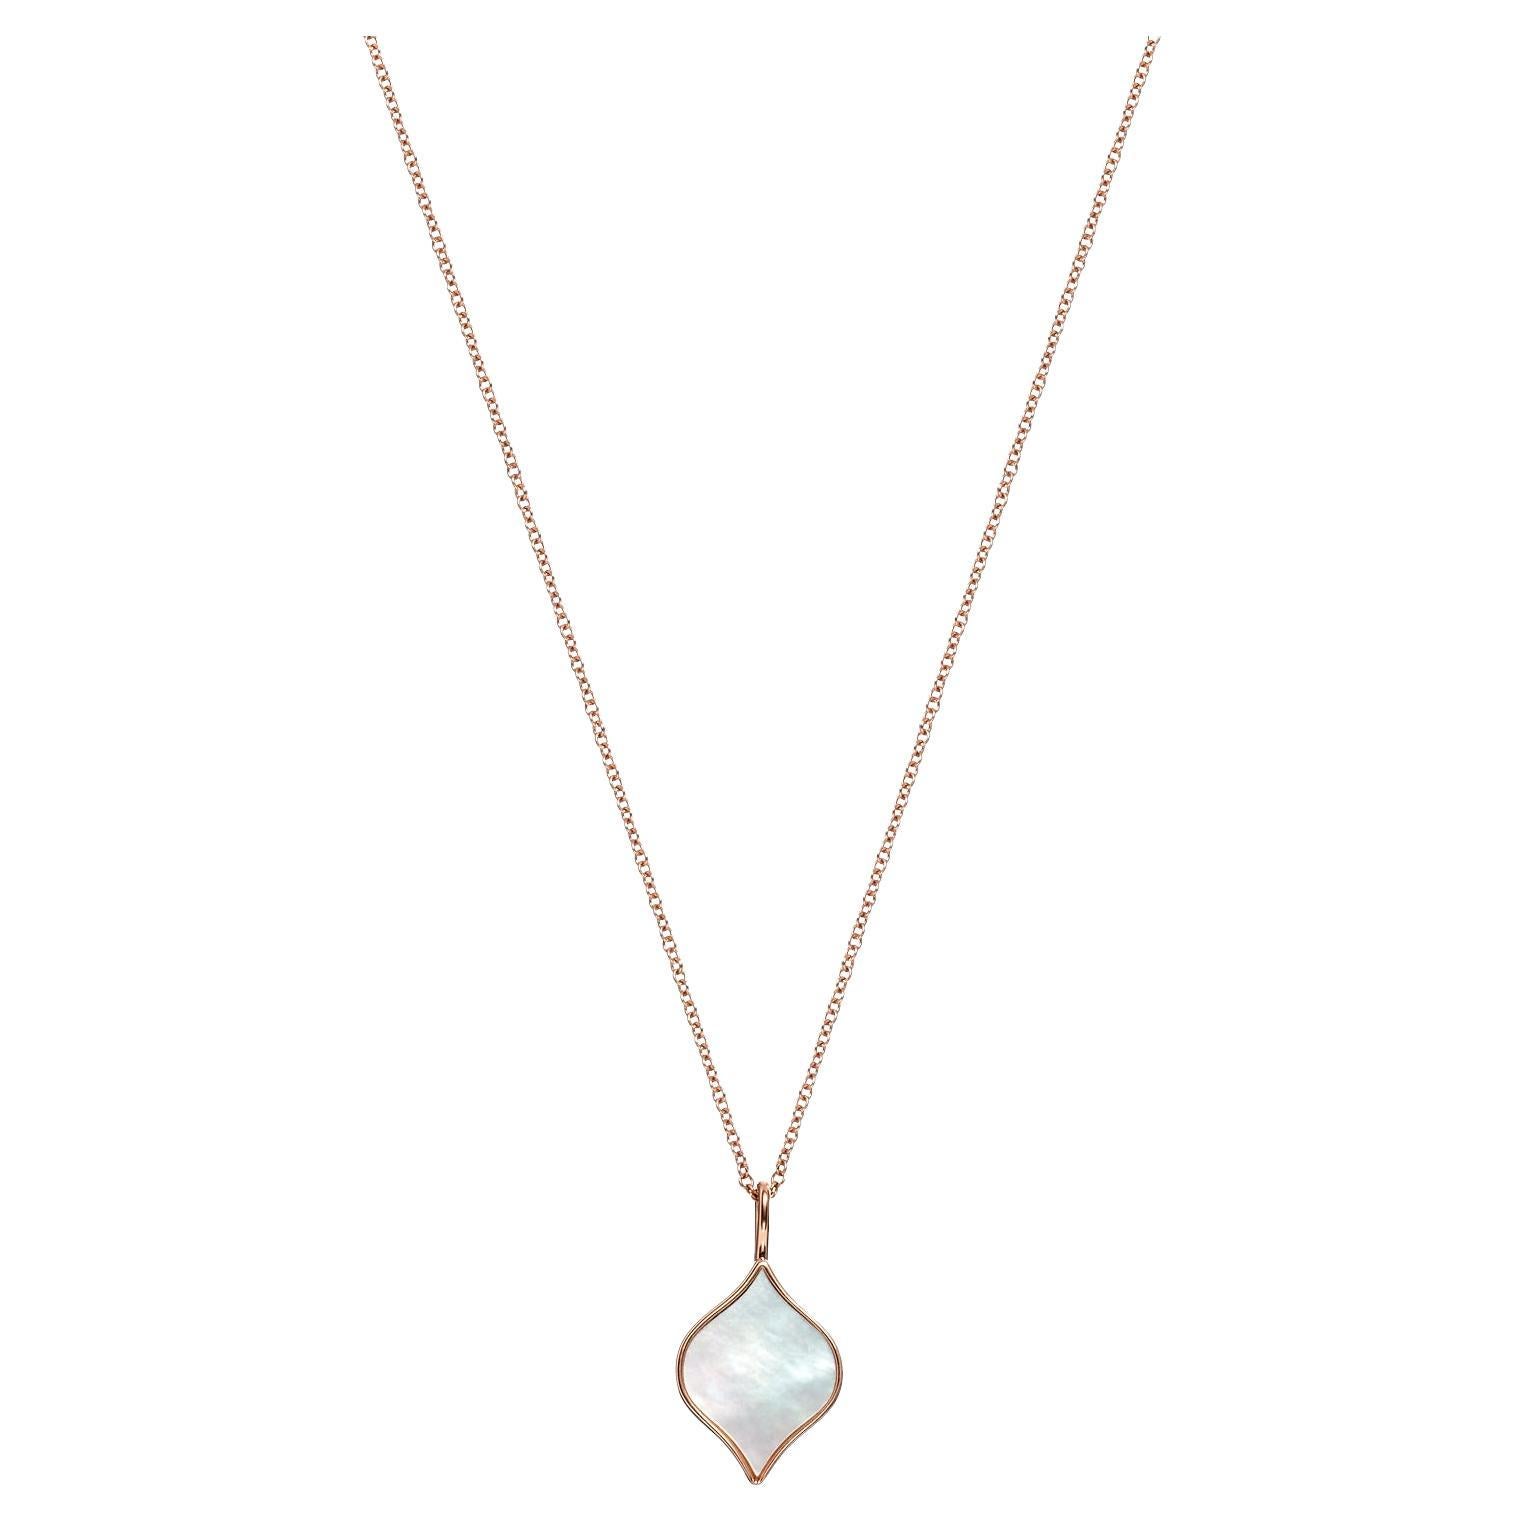 Roseate Jewelry Unity Pendant 16mm in 18k Rose Gold